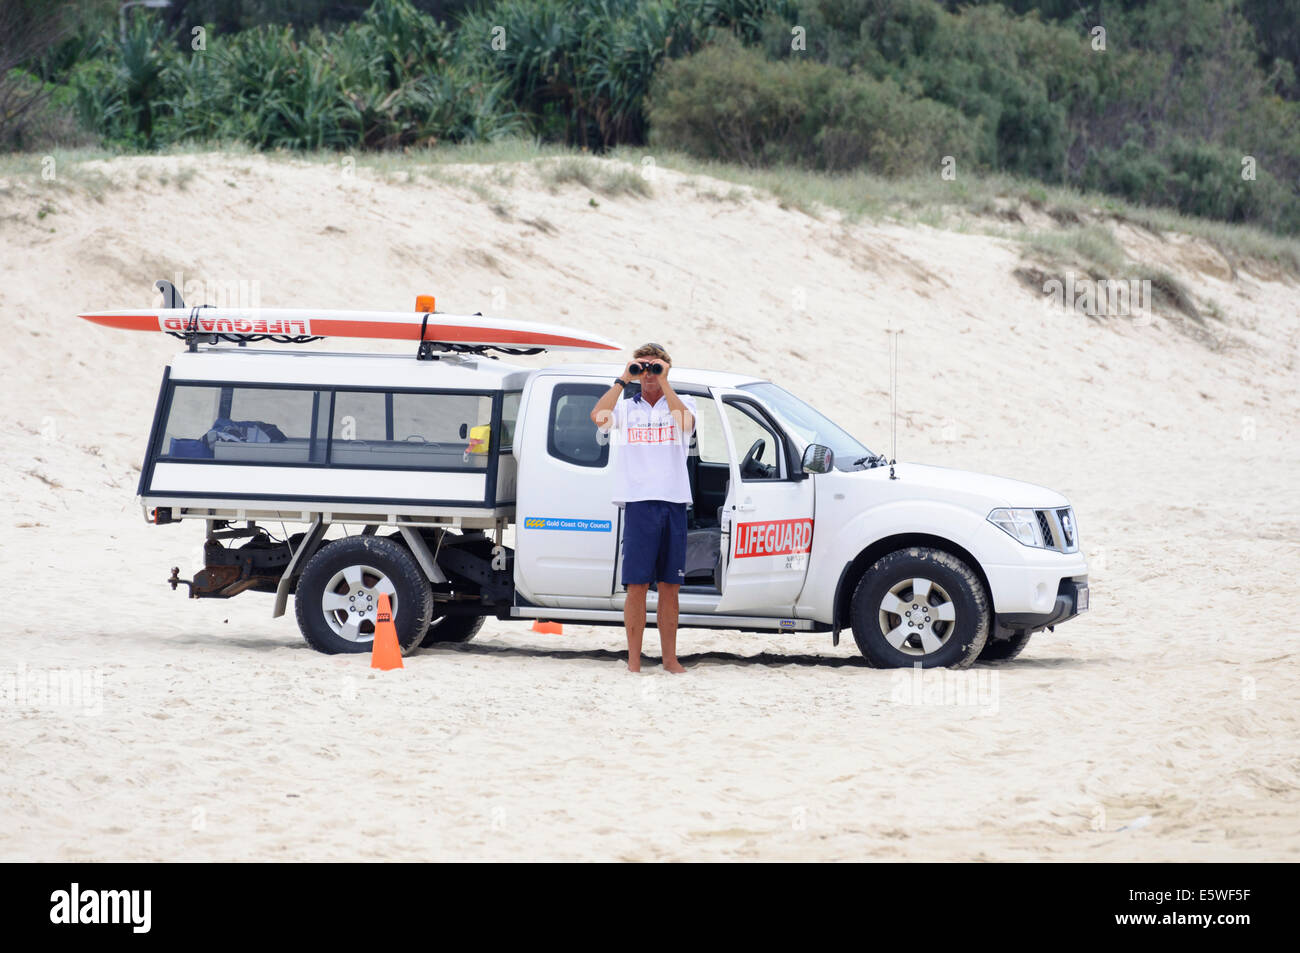 Lifeguard watches the beach while standing besides his specialised vehicle, ready to respond at a moment's notice. Stock Photo